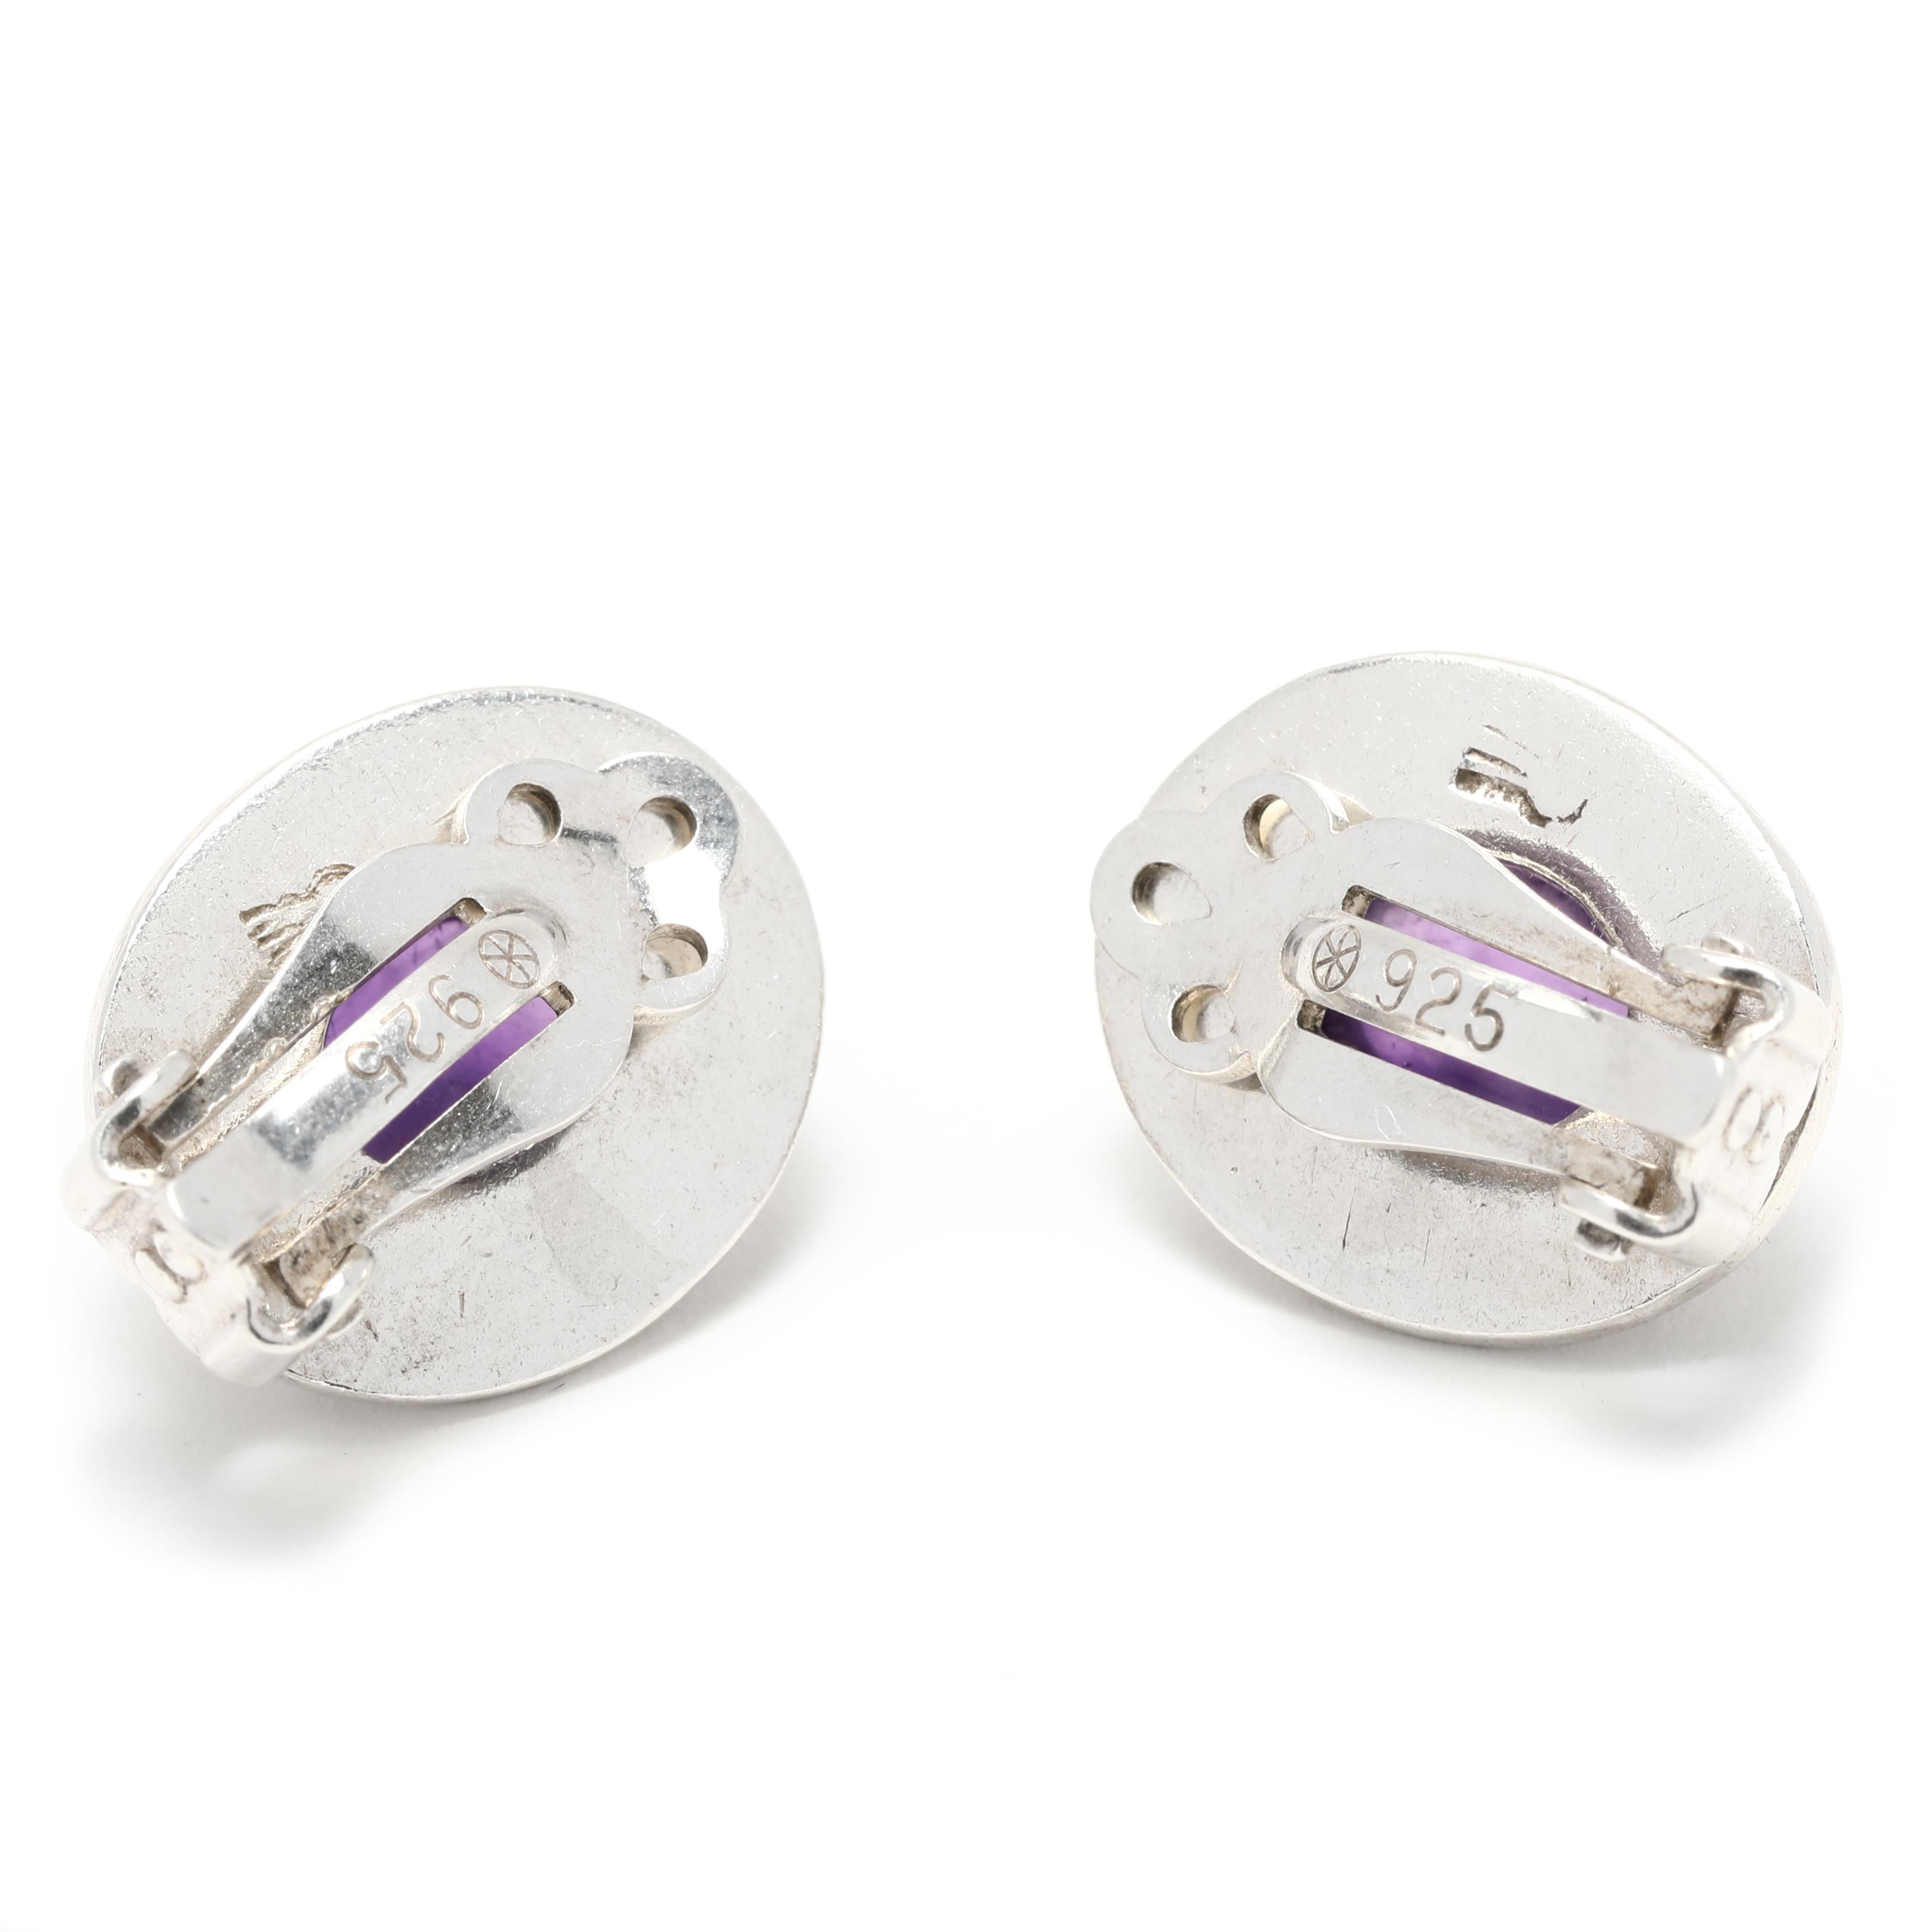 These beautiful vintage 4ctw oval amethyst clip on earrings are a stunning addition to any jewelry collection. Crafted in sterling silver, each earring measures 3/4 inch in length and is engraved with a unique design. The classic oval shape of the